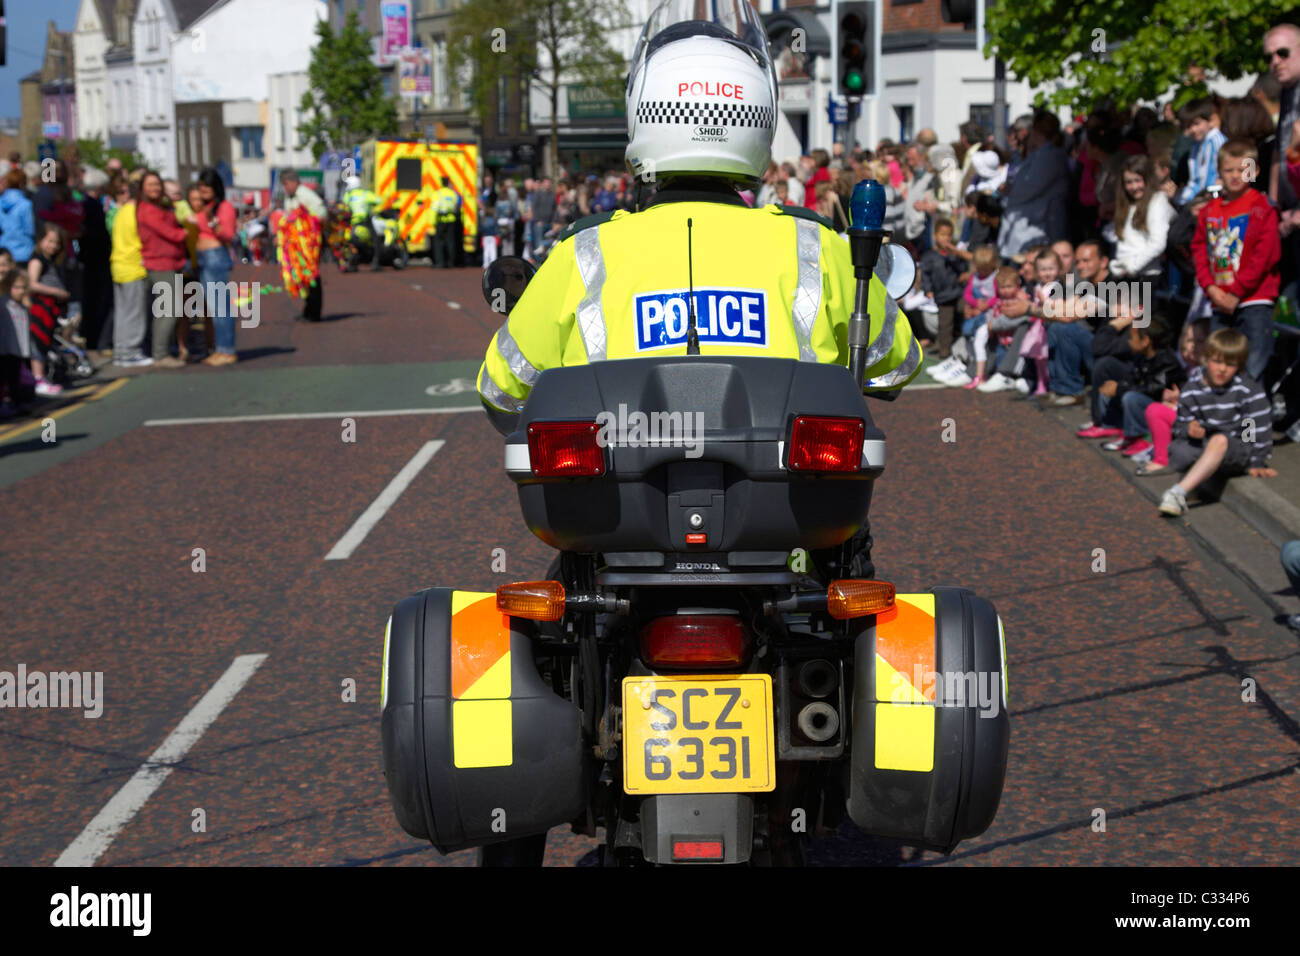 psni police motorcycle traffic control officer escort during parade in bangor county down northern ireland Stock Photo